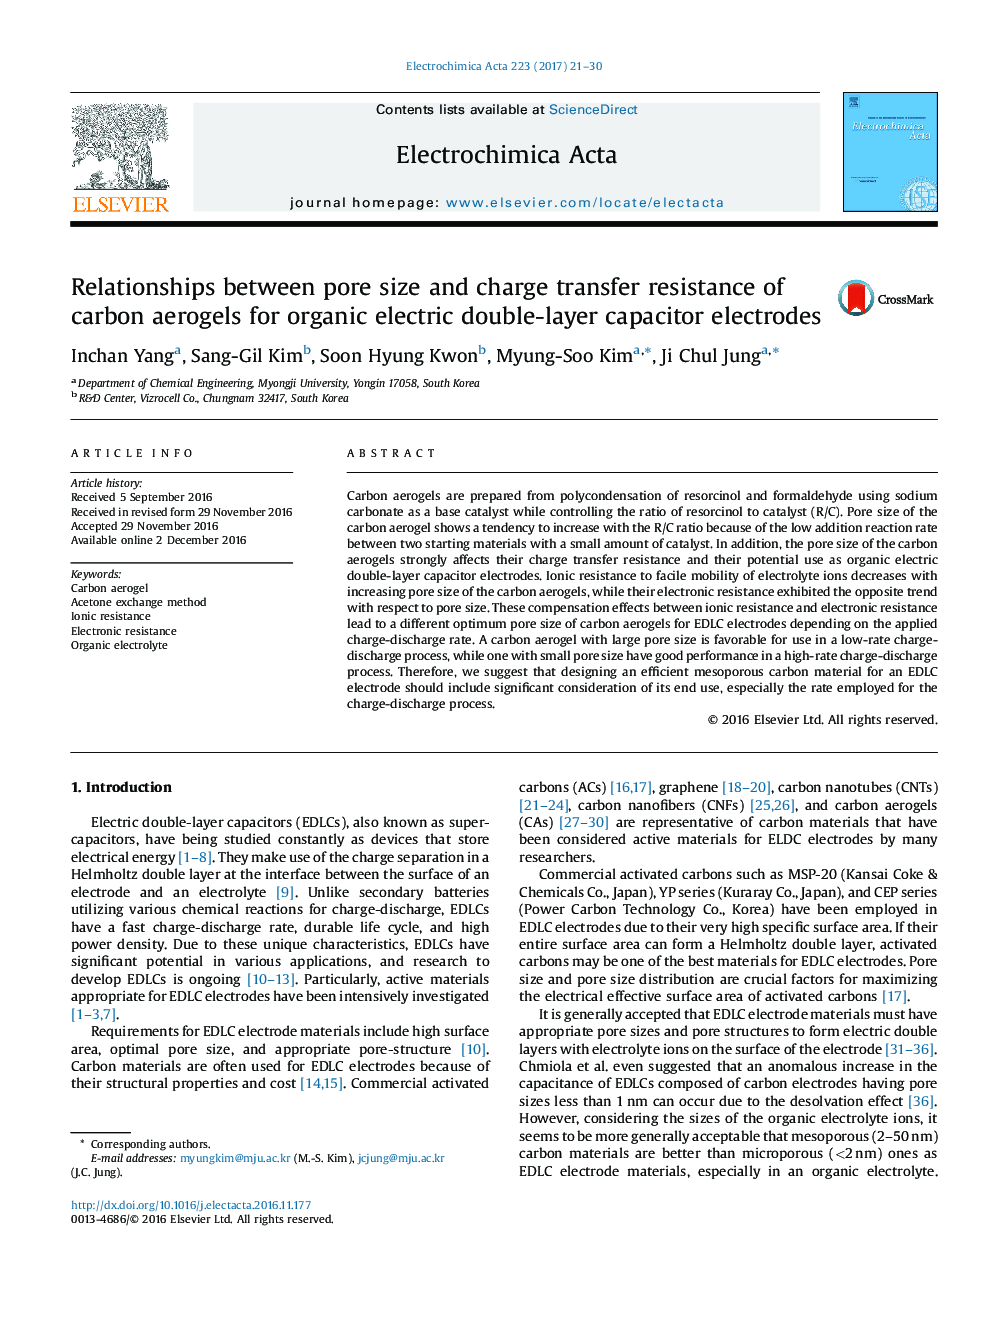 Relationships between pore size and charge transfer resistance of carbon aerogels for organic electric double-layer capacitor electrodes